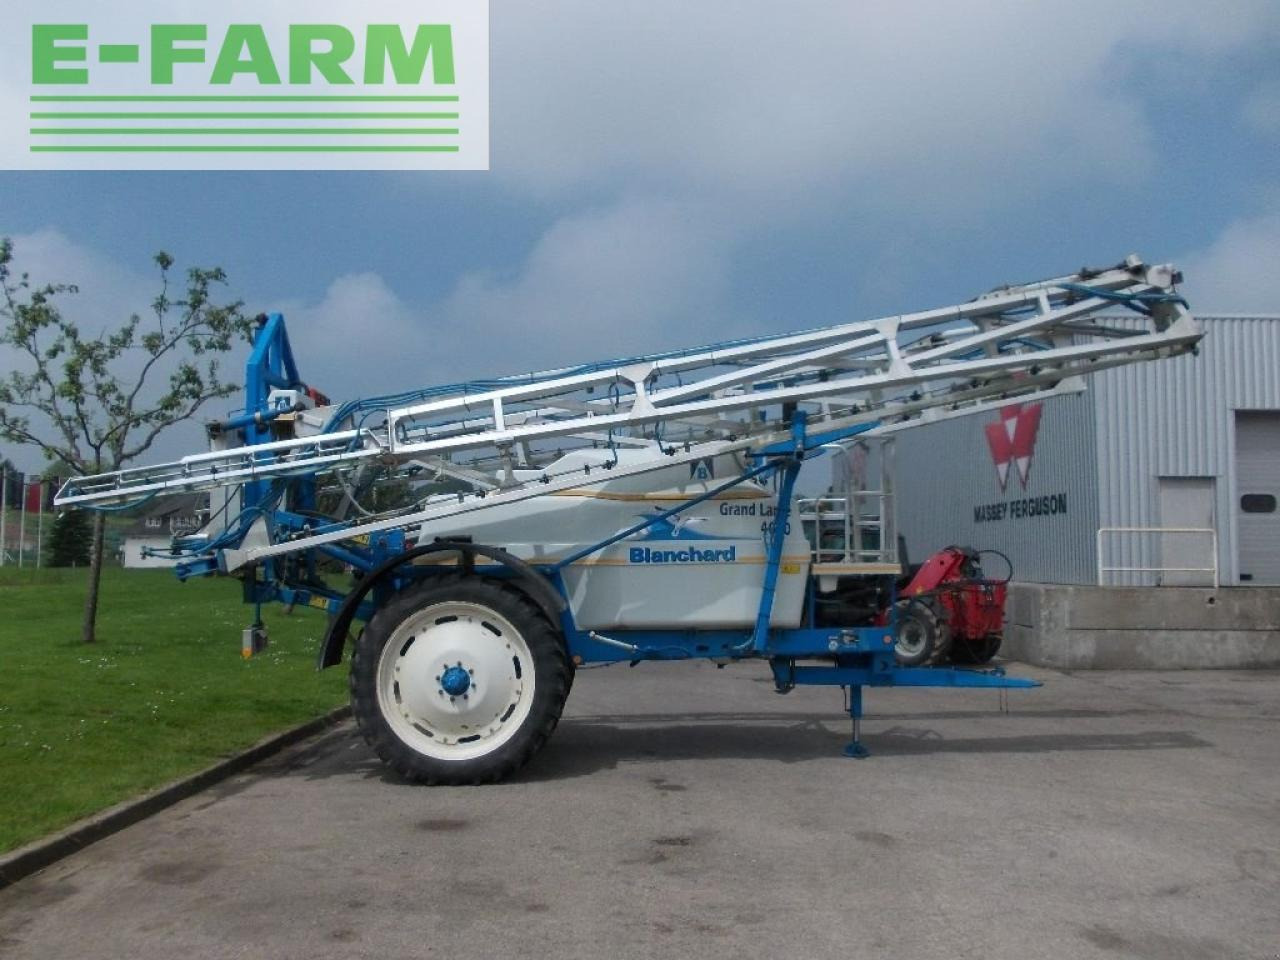 Trailed sprayer grand large 4000: picture 2